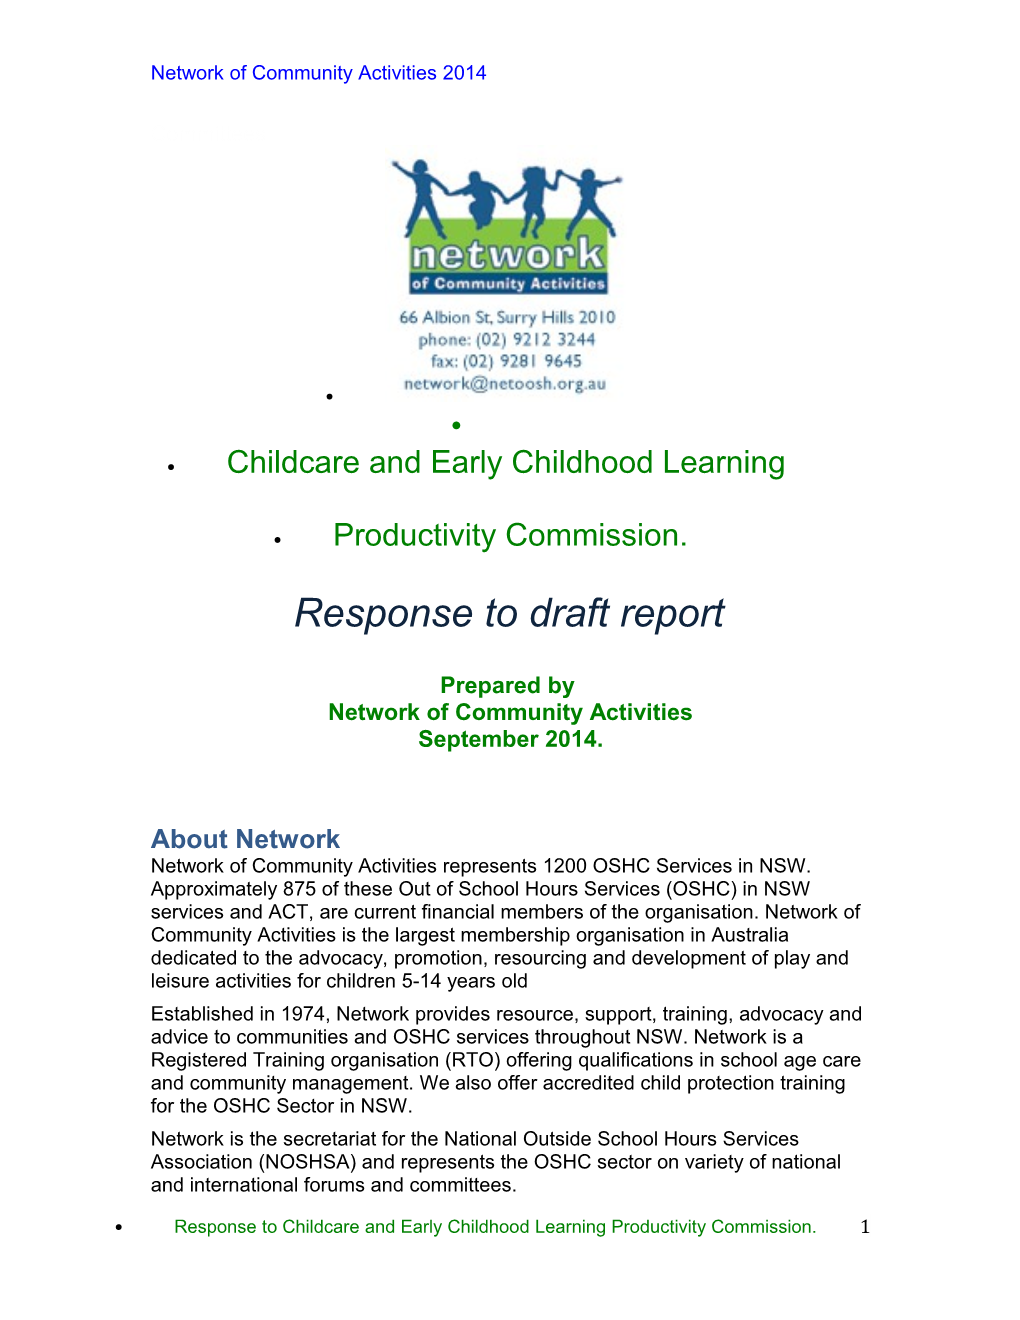 Submission DR892 - Network of Community Activities - Childcare and Early Childhood Learning